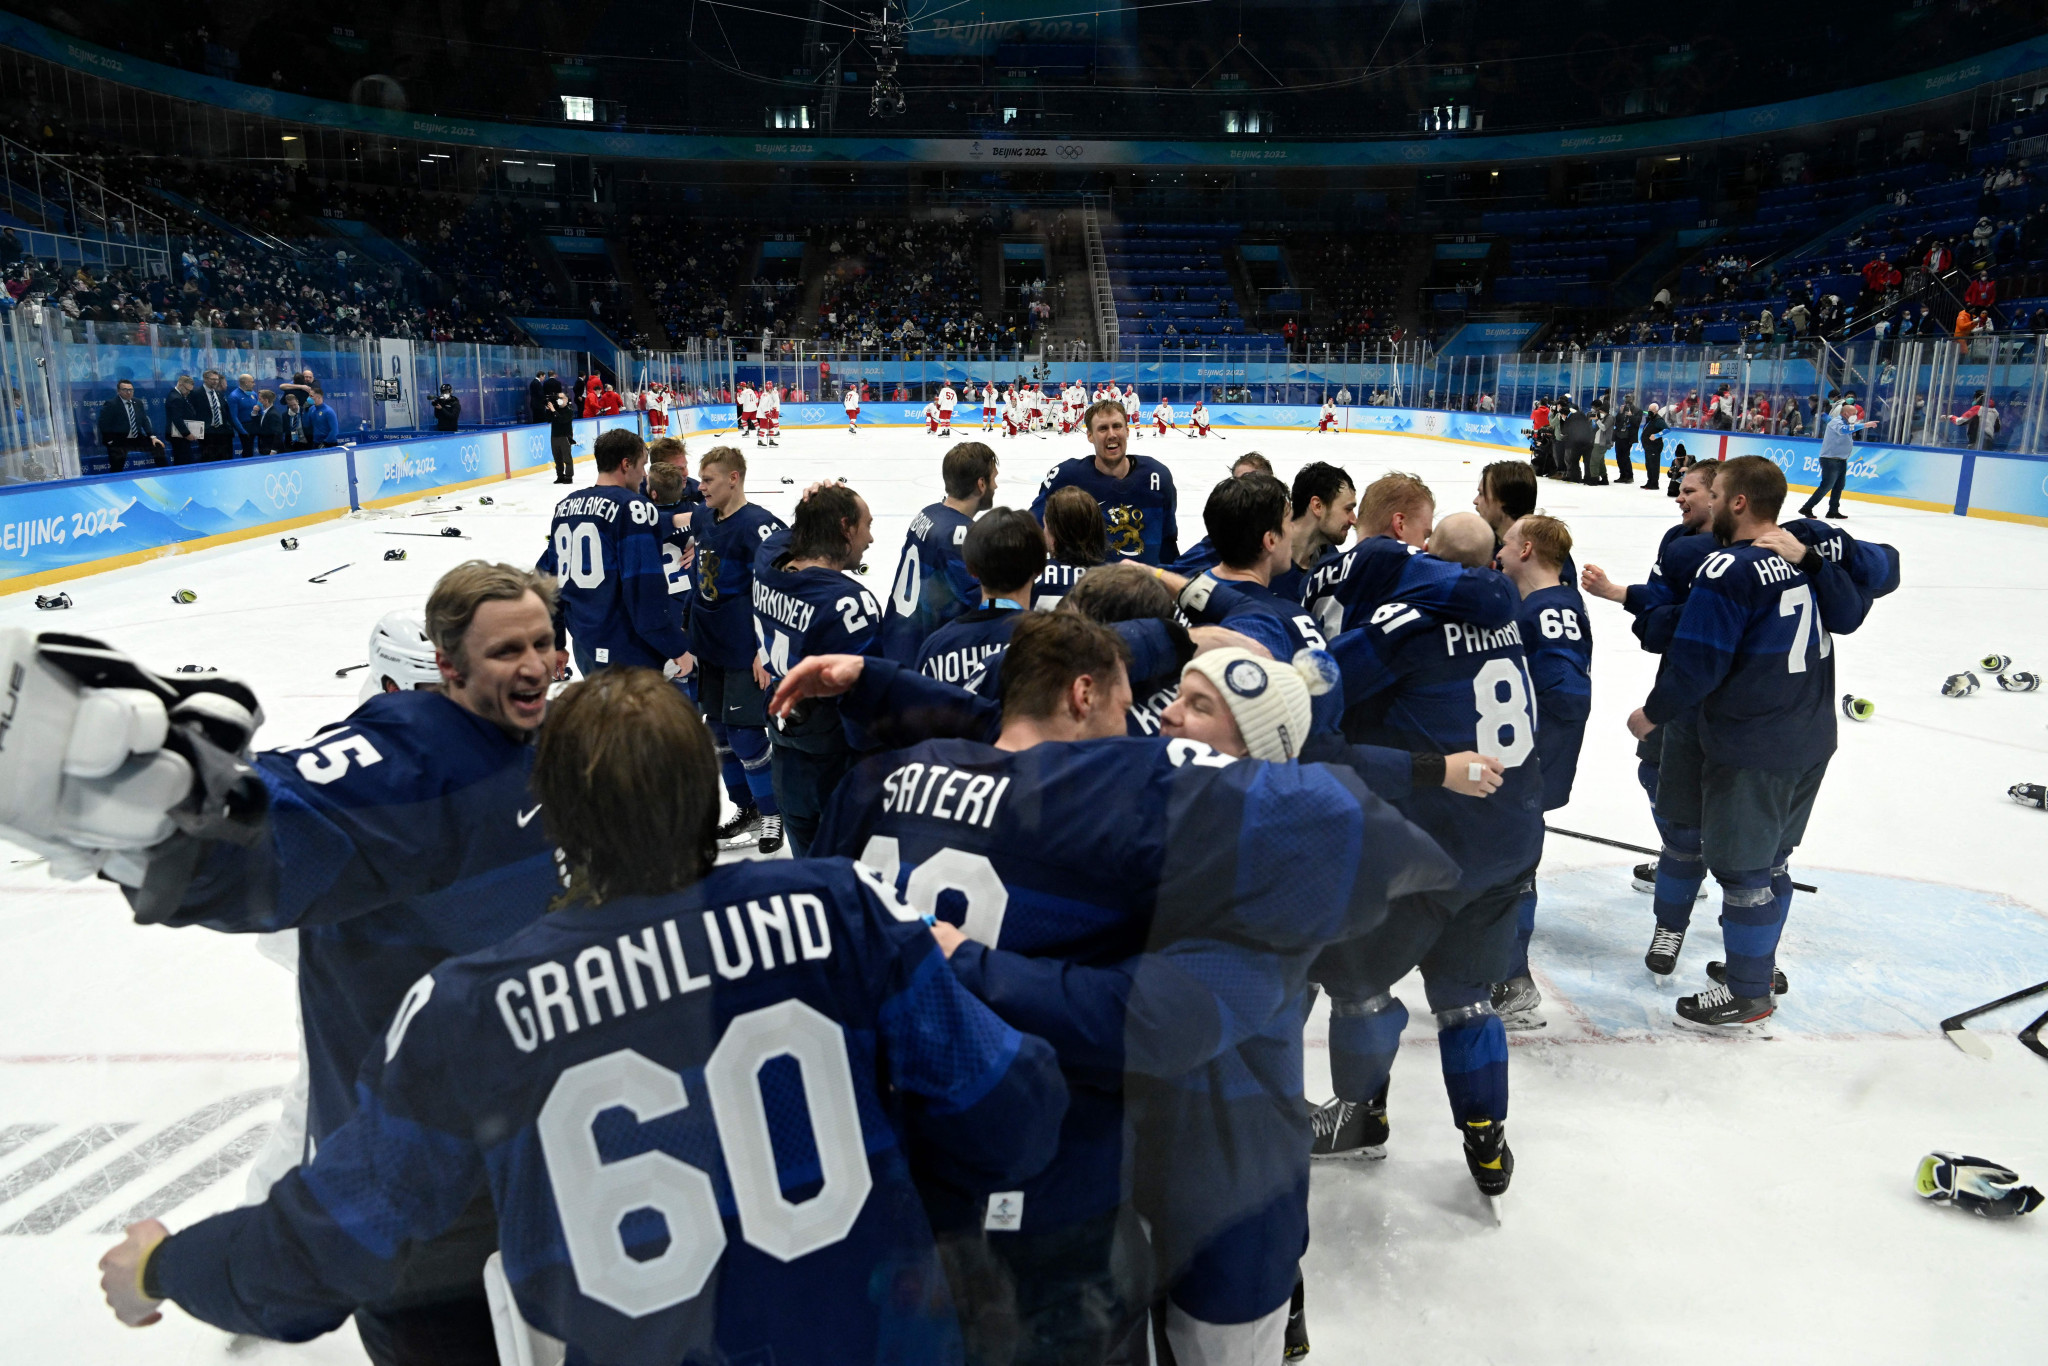 Finland defeated ROC 2-1 in the men's ice hockey final ©Getty Images